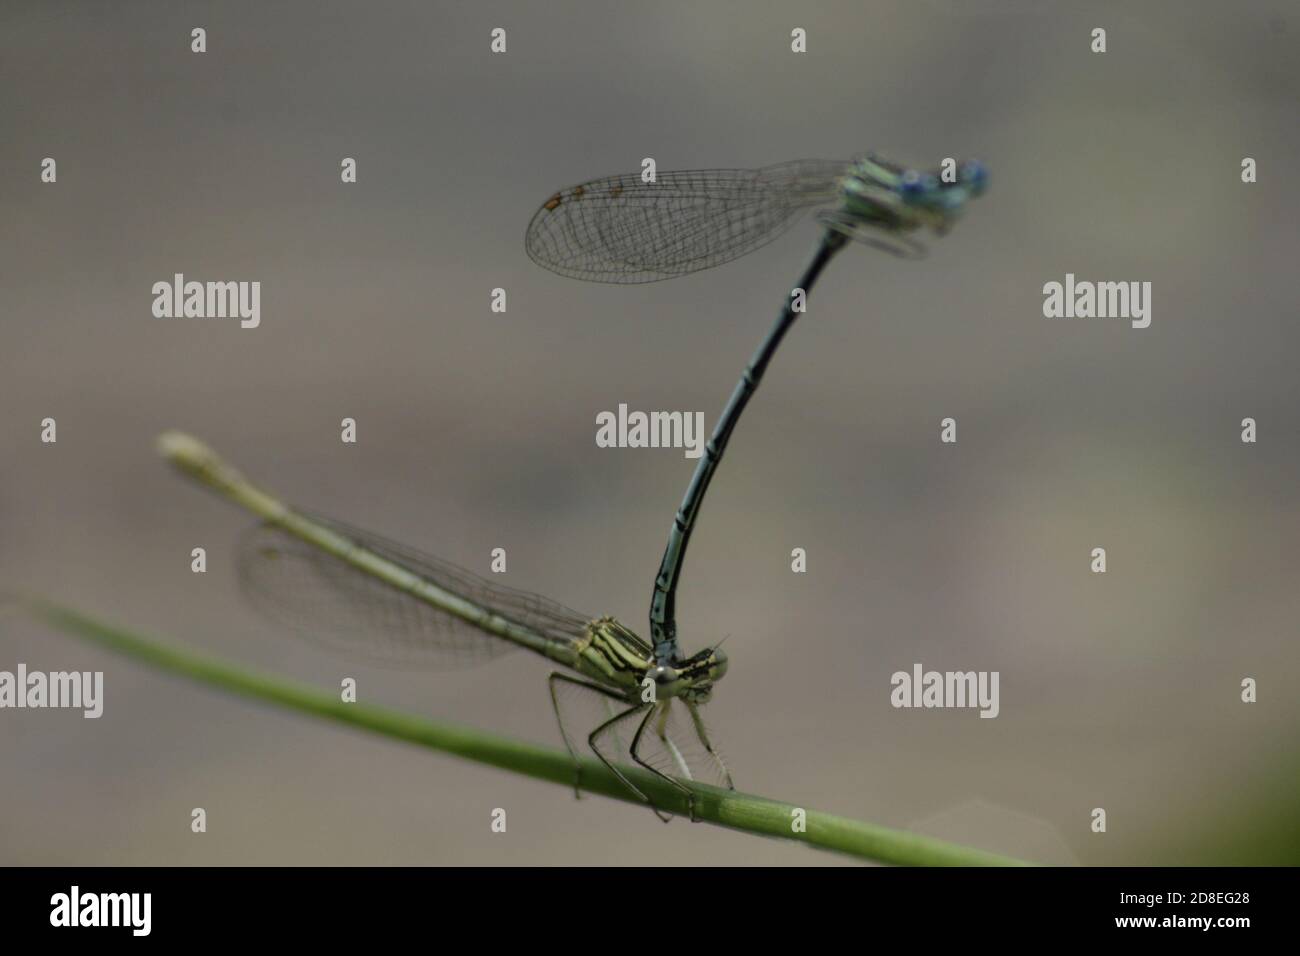 Dragonfly Mating Stock Photo